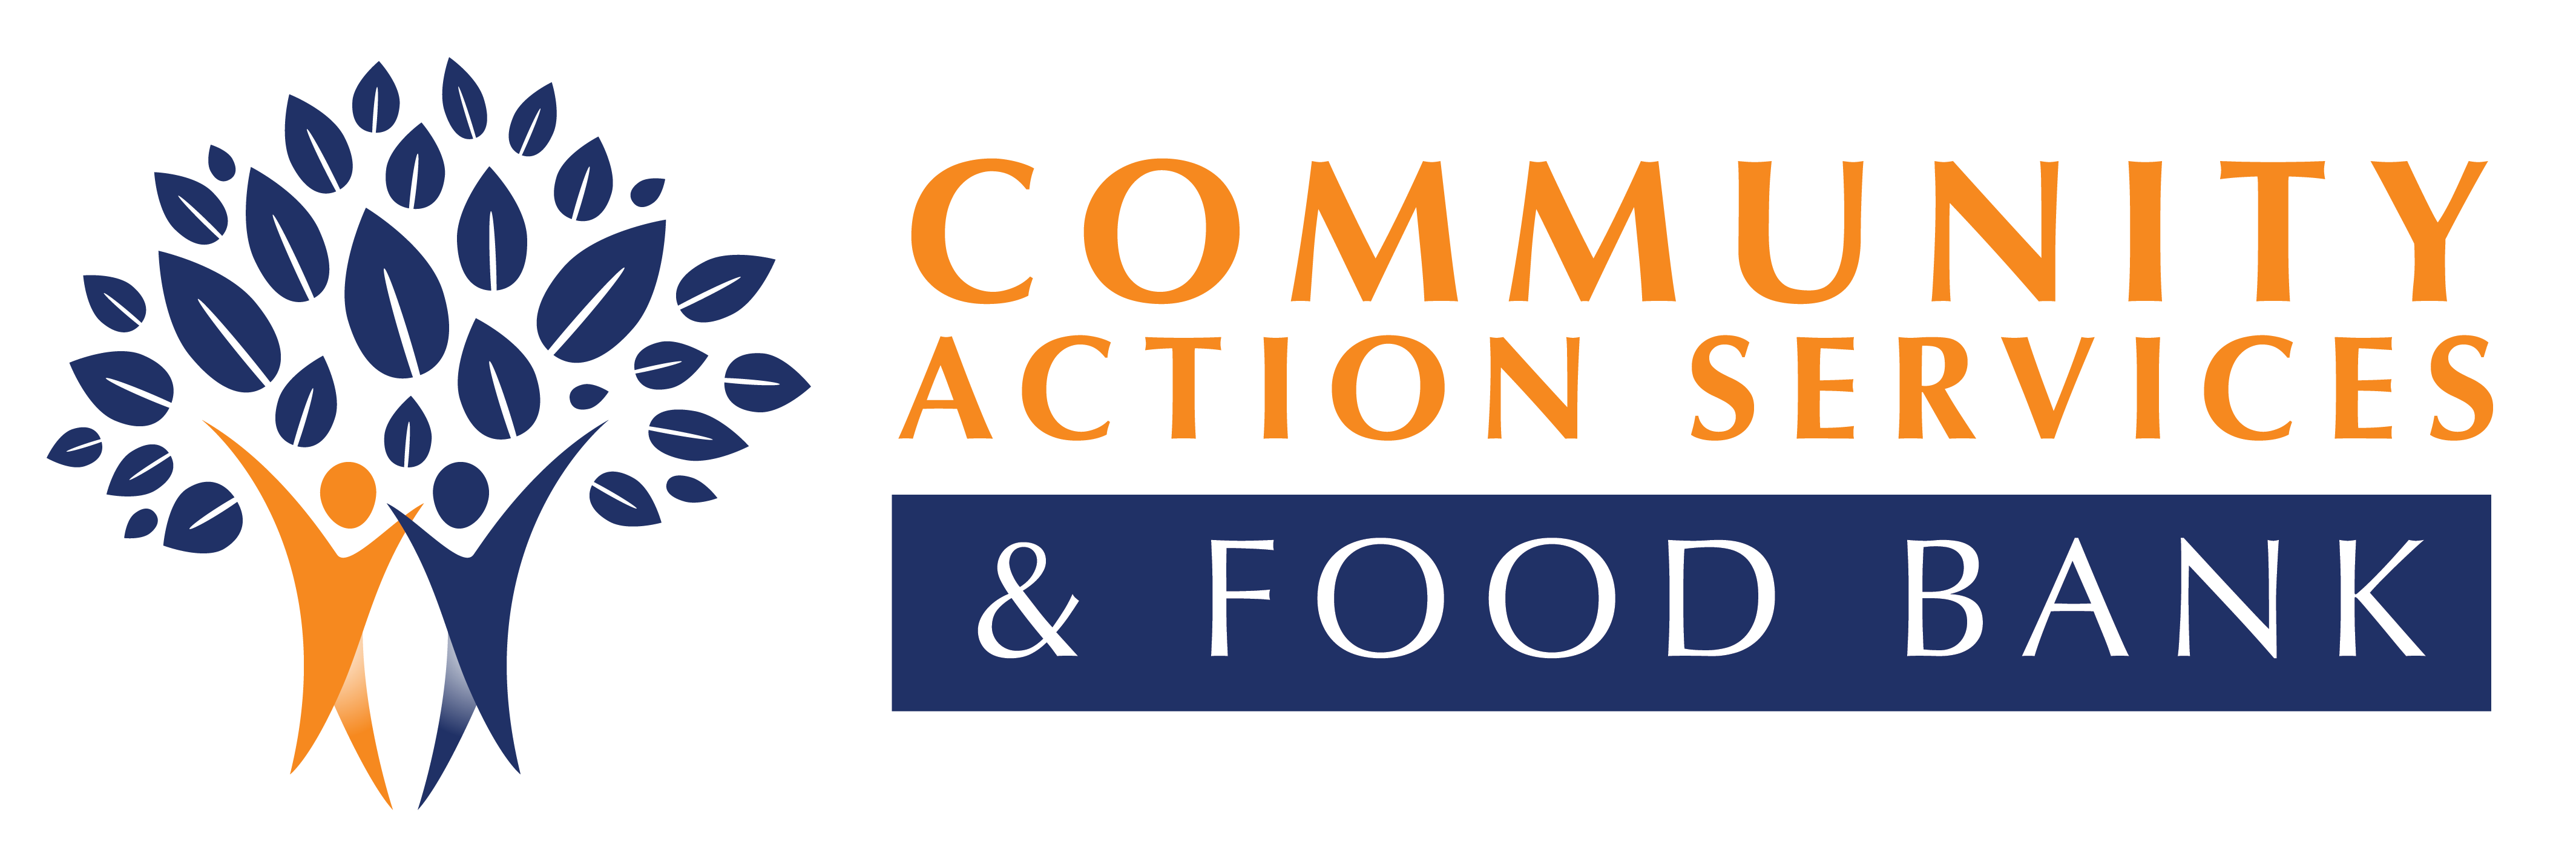 COMMUNITY ACTION SERVICES & FOOD BANK